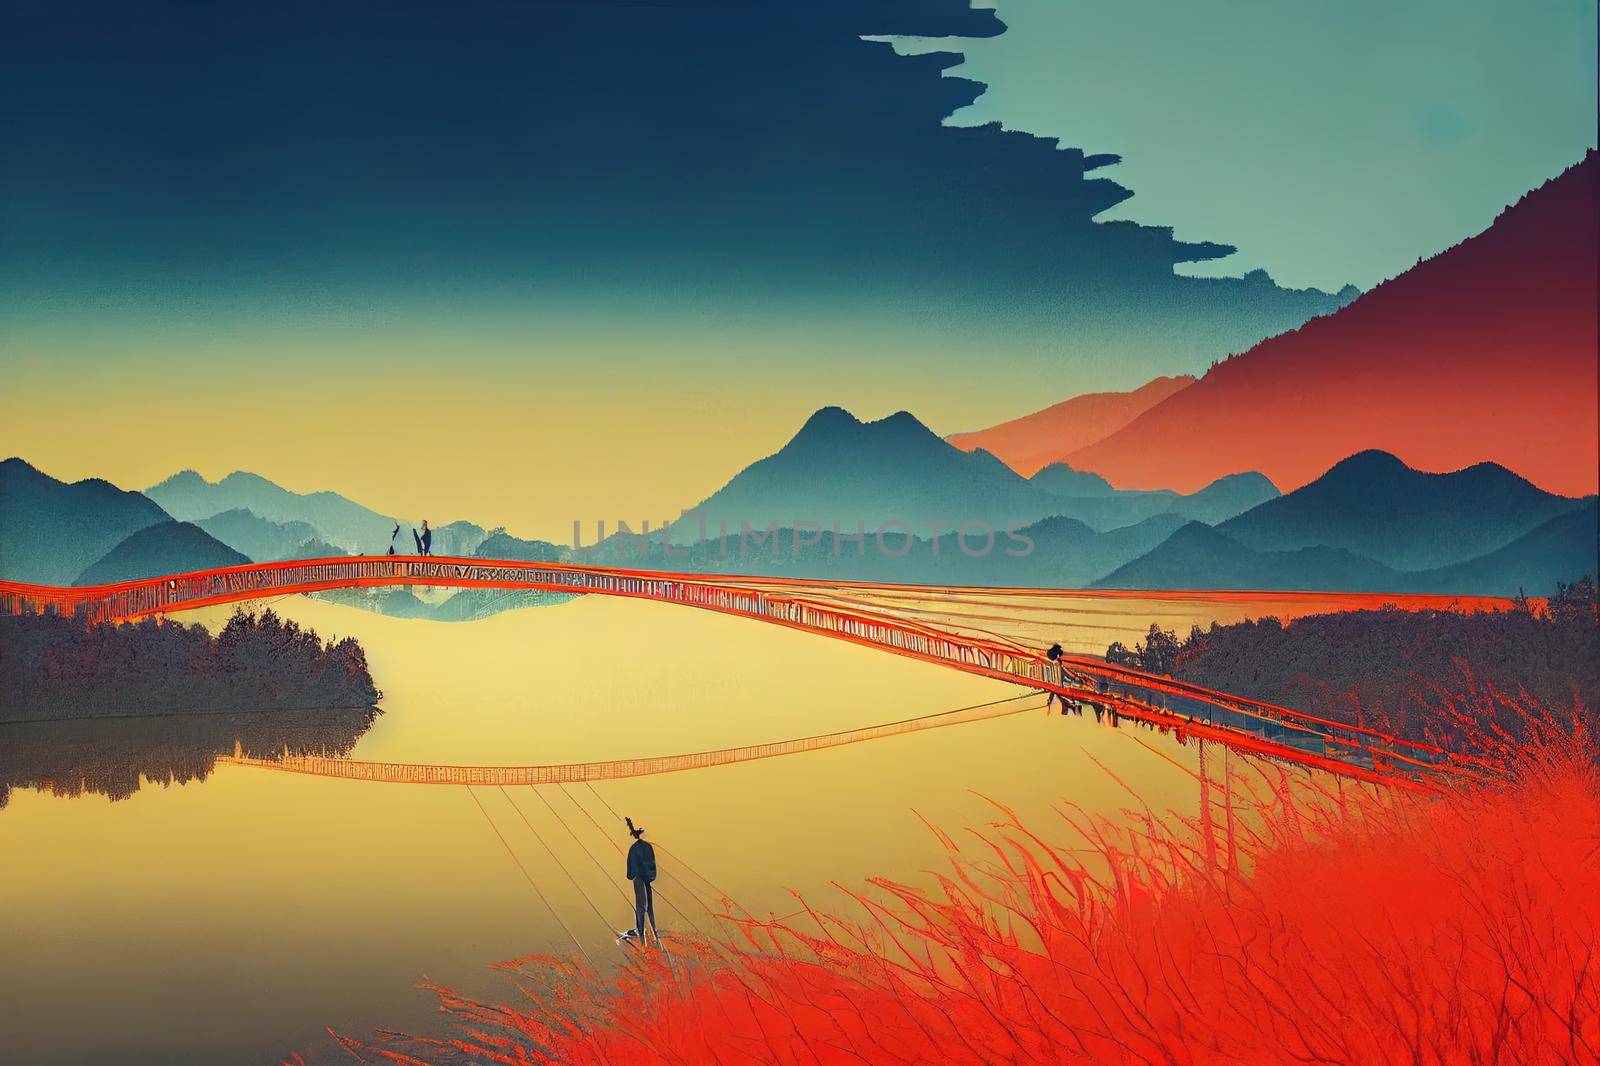 Aerial view of silhouette of walking man on the suspension bridge, river, mountains, red trees, green grass, orange sun at sunset in autumn. Colorful landscape with forest, lake, reflection in water